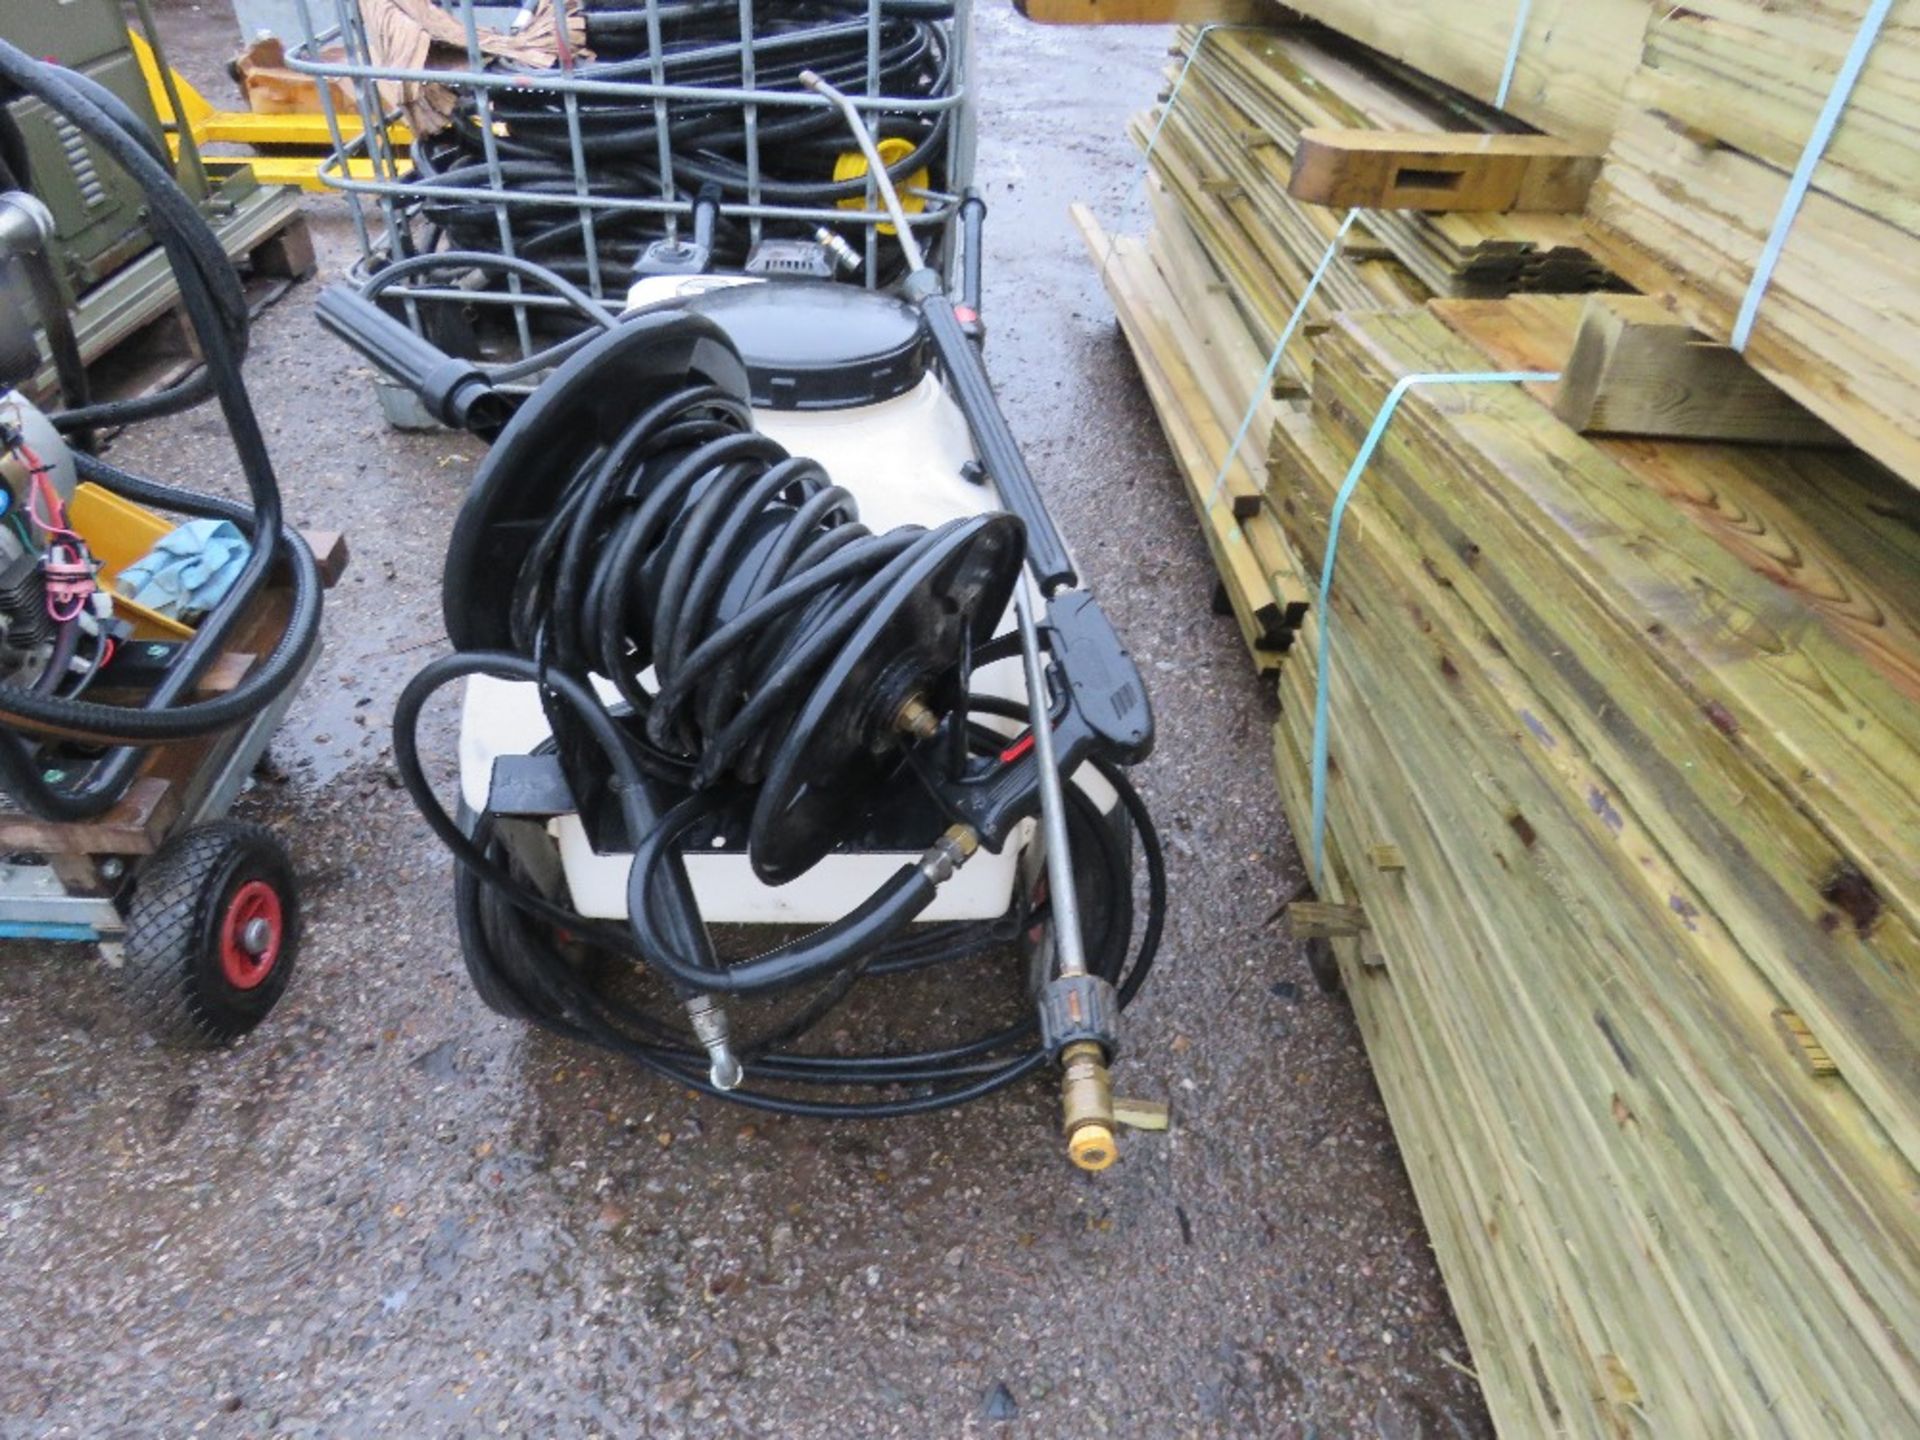 COMET PETROL ENGINED POWER WASHER WITH TANK ON A BARROW FRAME. SOURCED FROM COMPANY LIQUIDATION. - Image 2 of 5